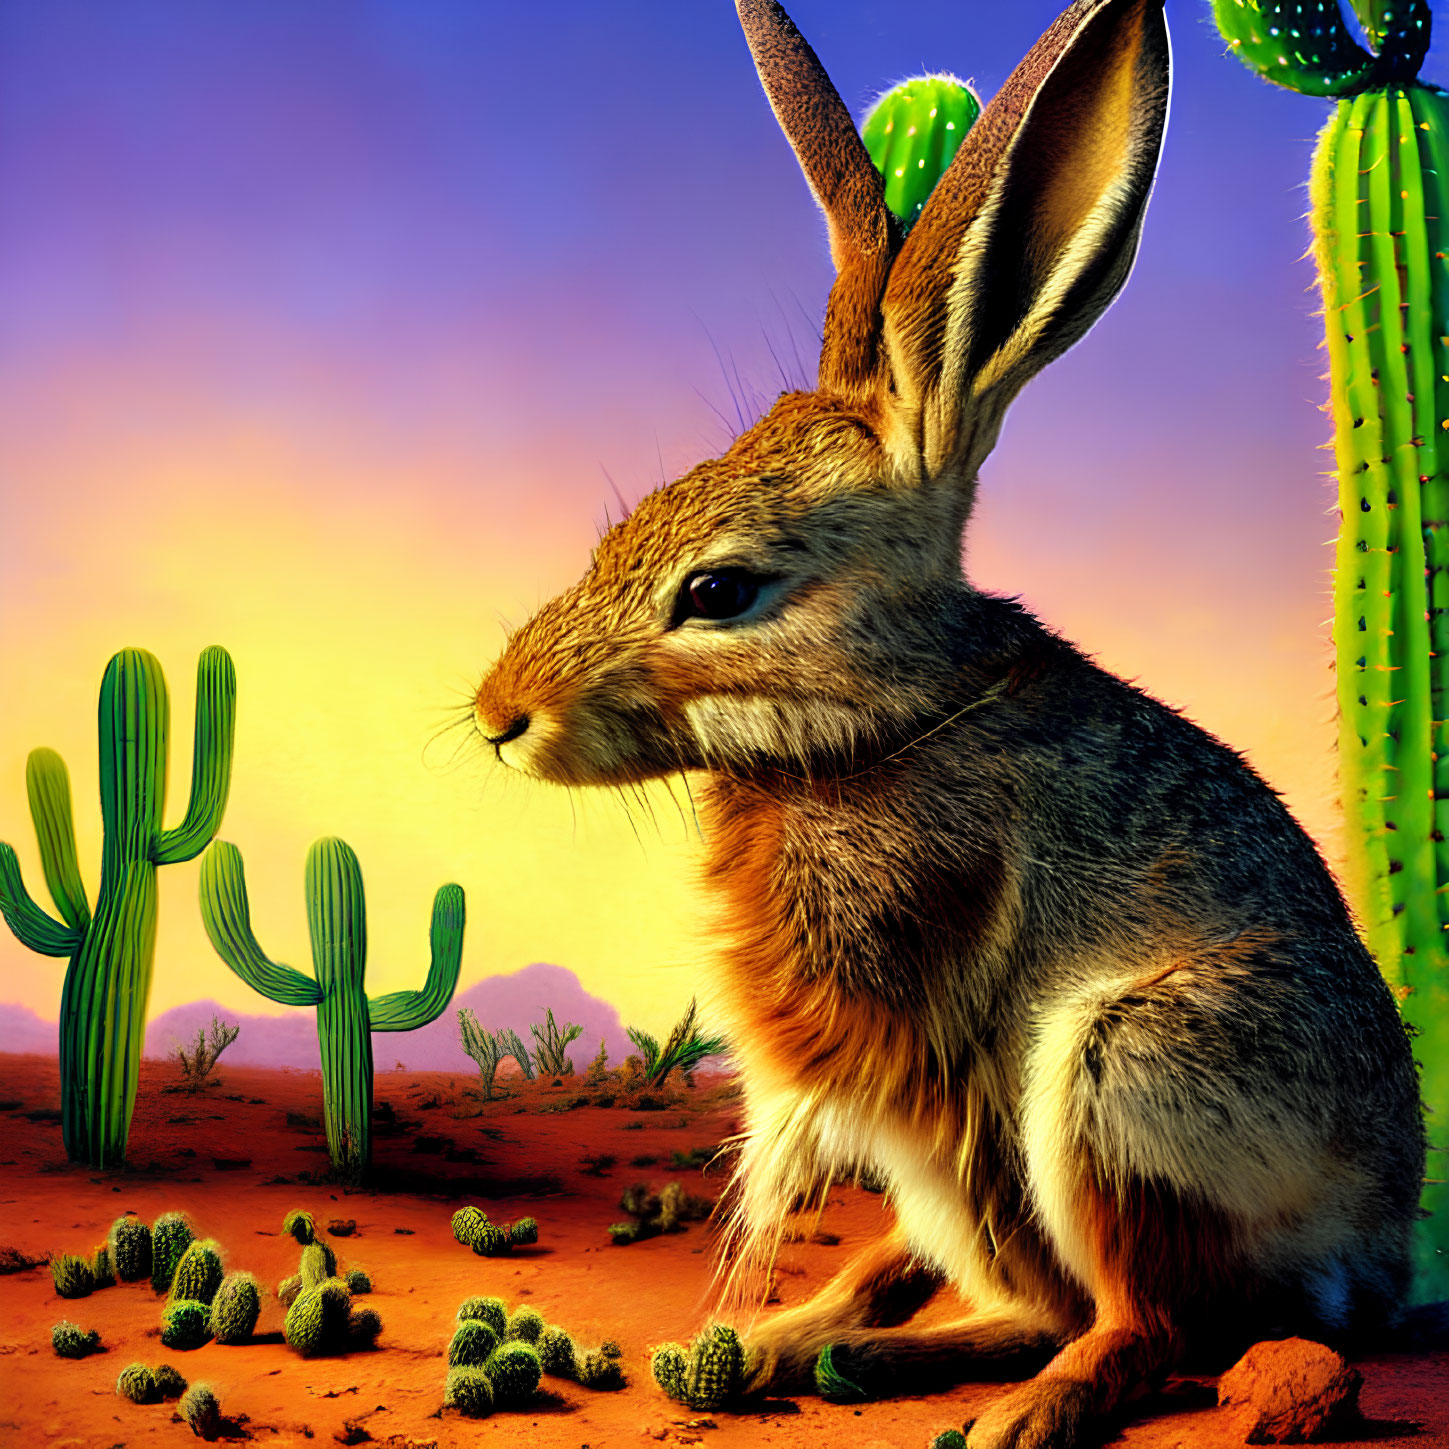 Jackrabbit in desert landscape at sunset with saguaro cacti and prickly pears